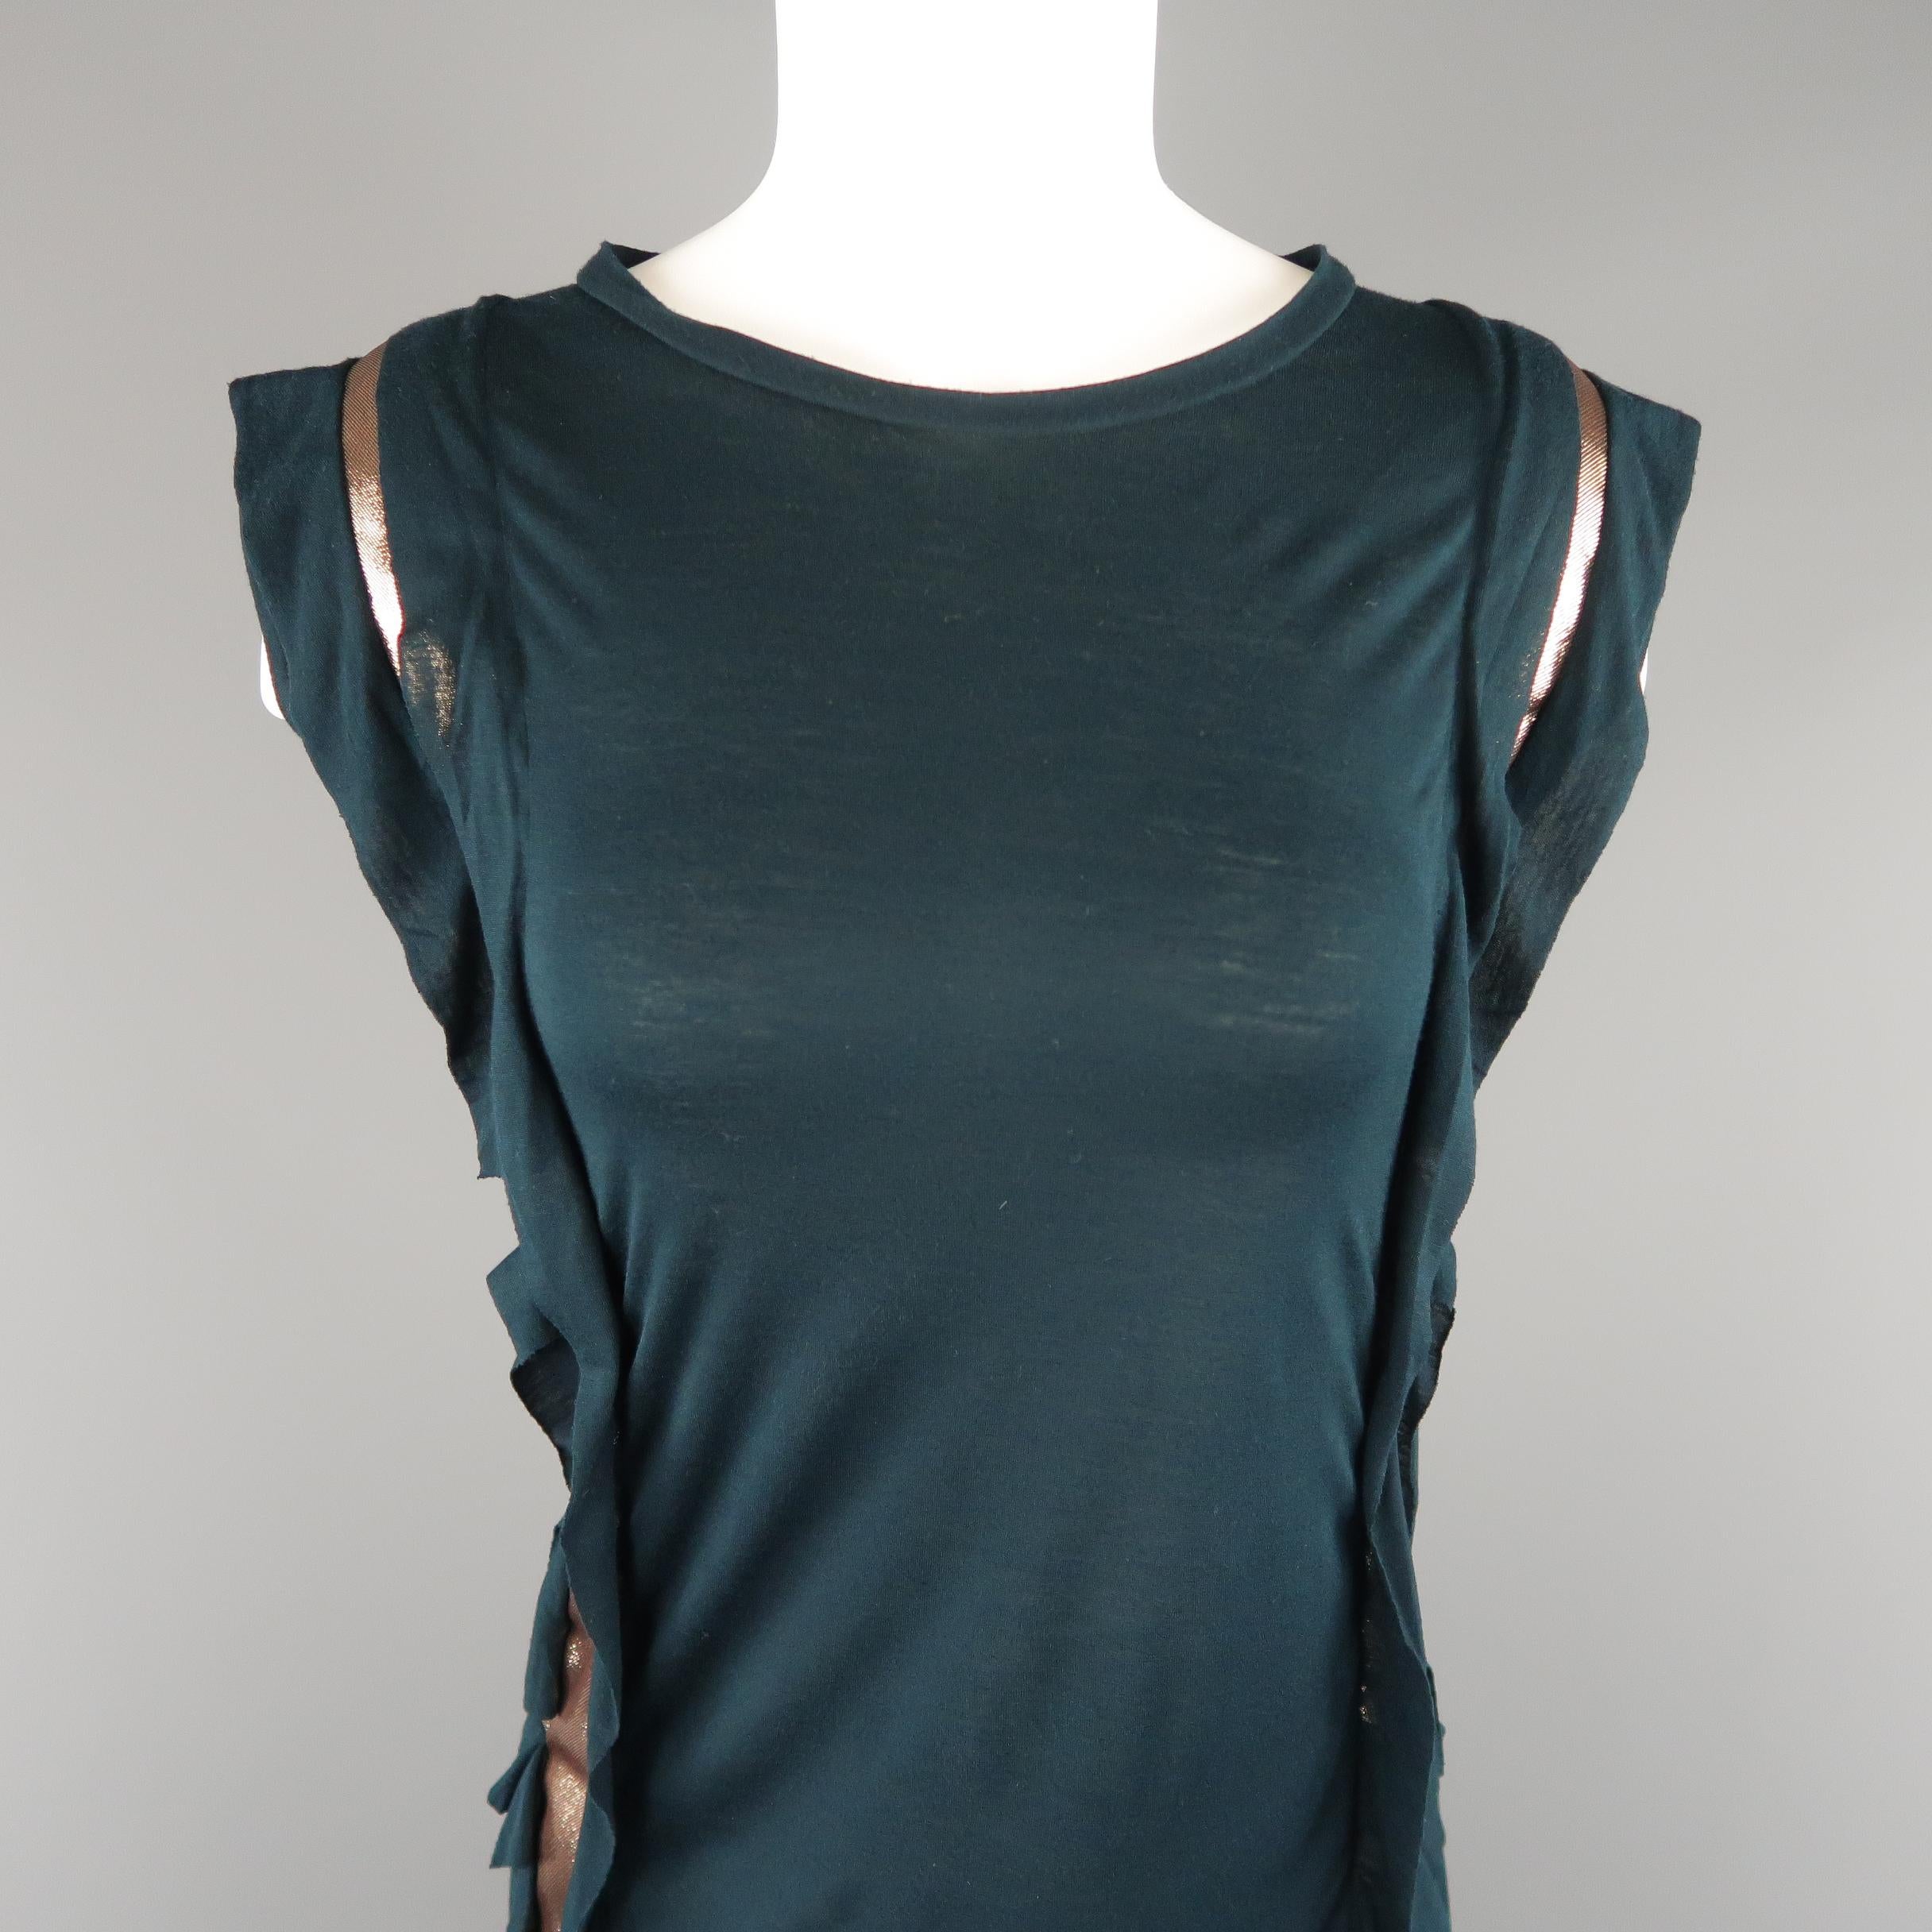 LANVIN shift dress comes in forest green sheer jersey with a scoop neck, metallic gold ribbon trim and ruffled sides.
 
New with Tags. Retails: $1,180.00.
Marked: XL
 
Measurements:
 
Shoulder: 17 in.
Bust: 44 in.
Waist: 42 in.
Hip: 46 in.
Length: